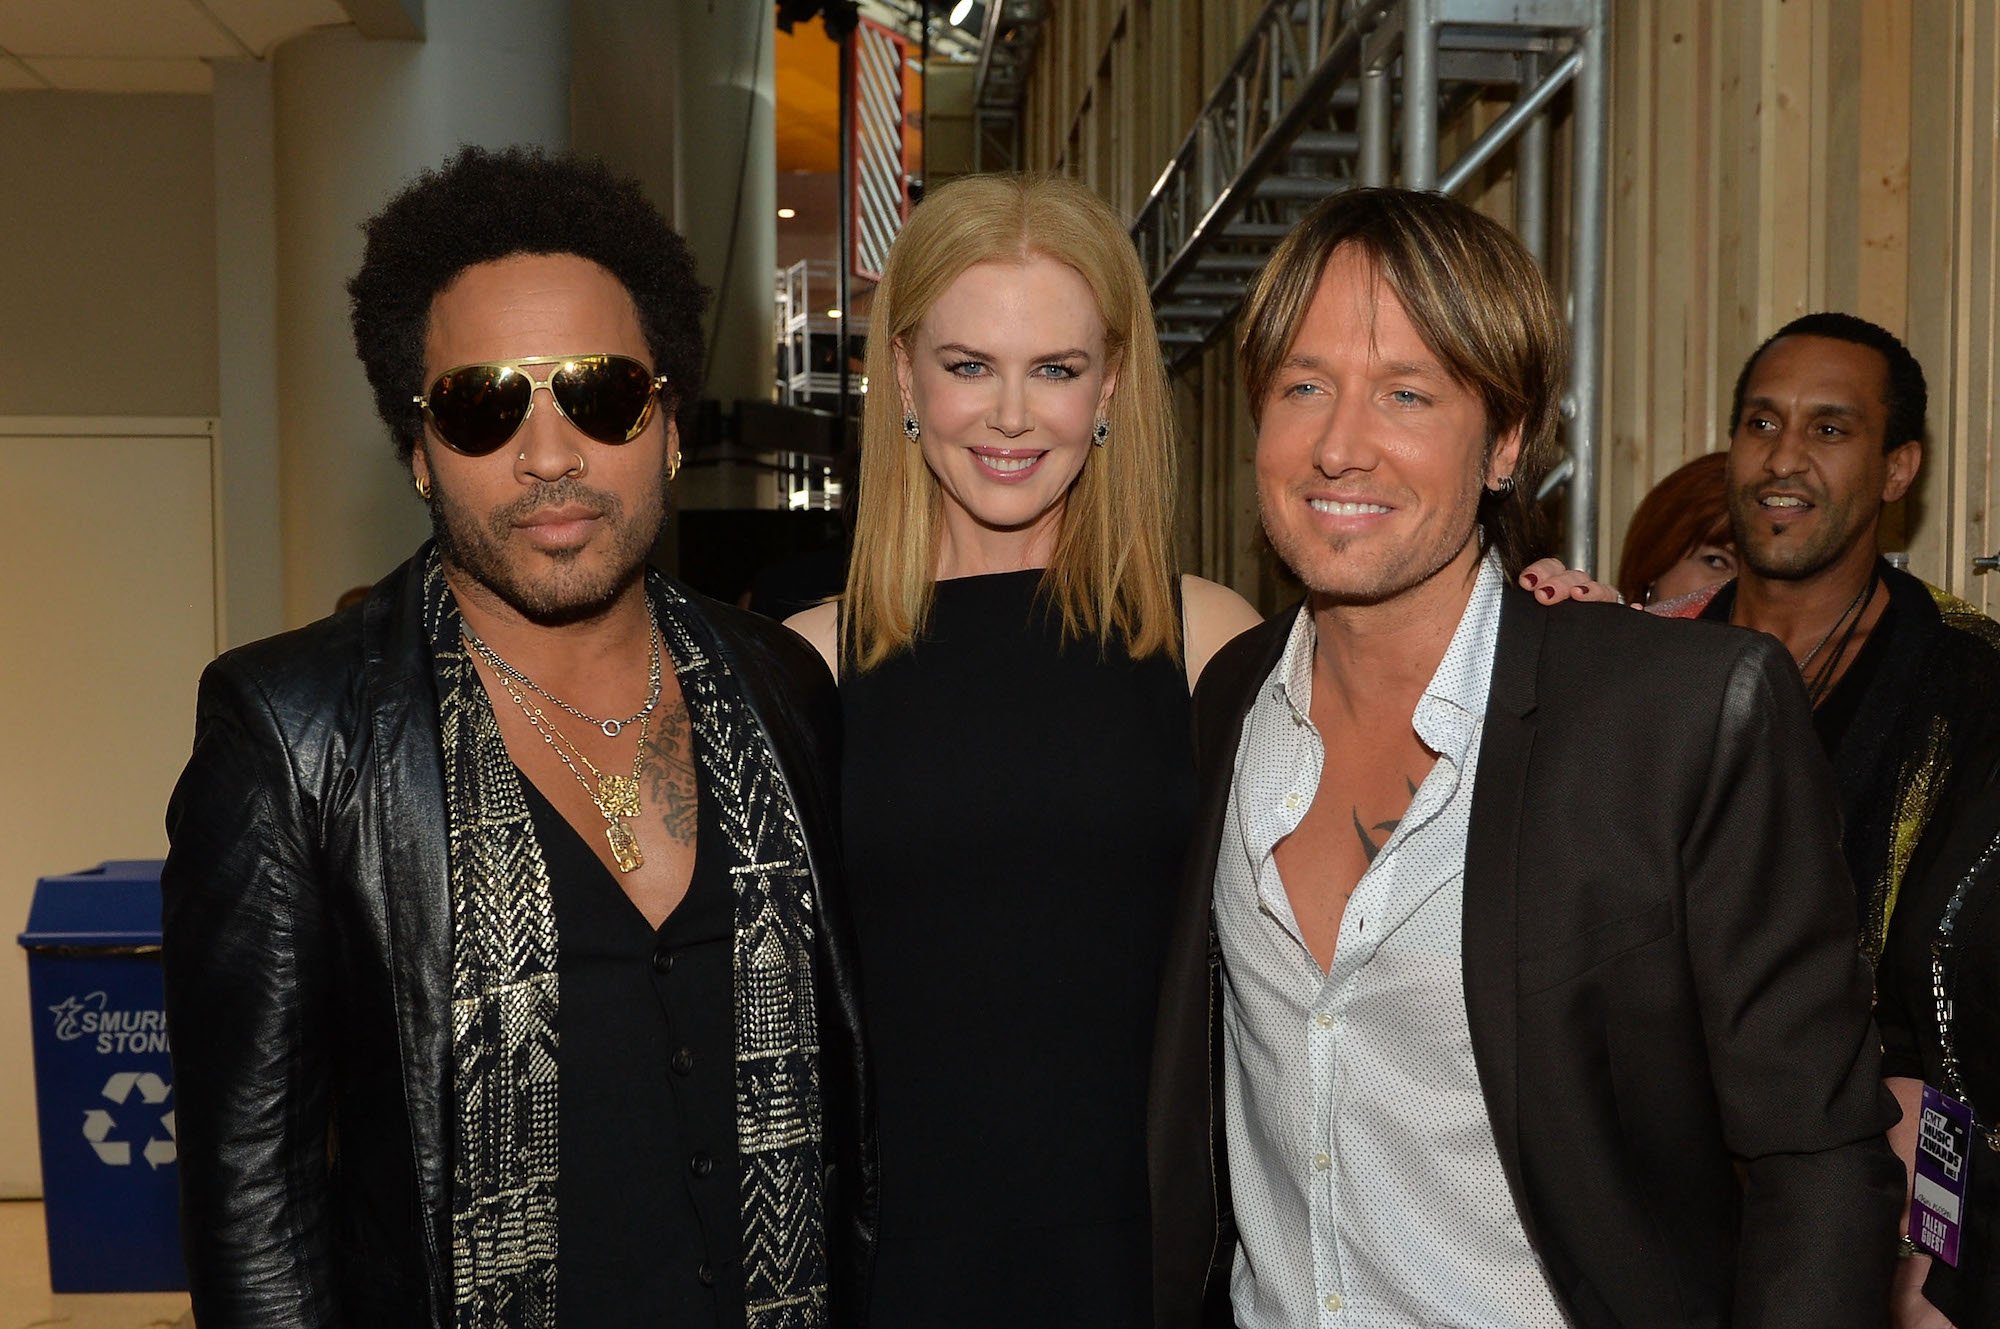 Lenny Kravitz posing with Nicole Kidman and her husband Keith Urban backstage at the 2013 CMT Music Awards